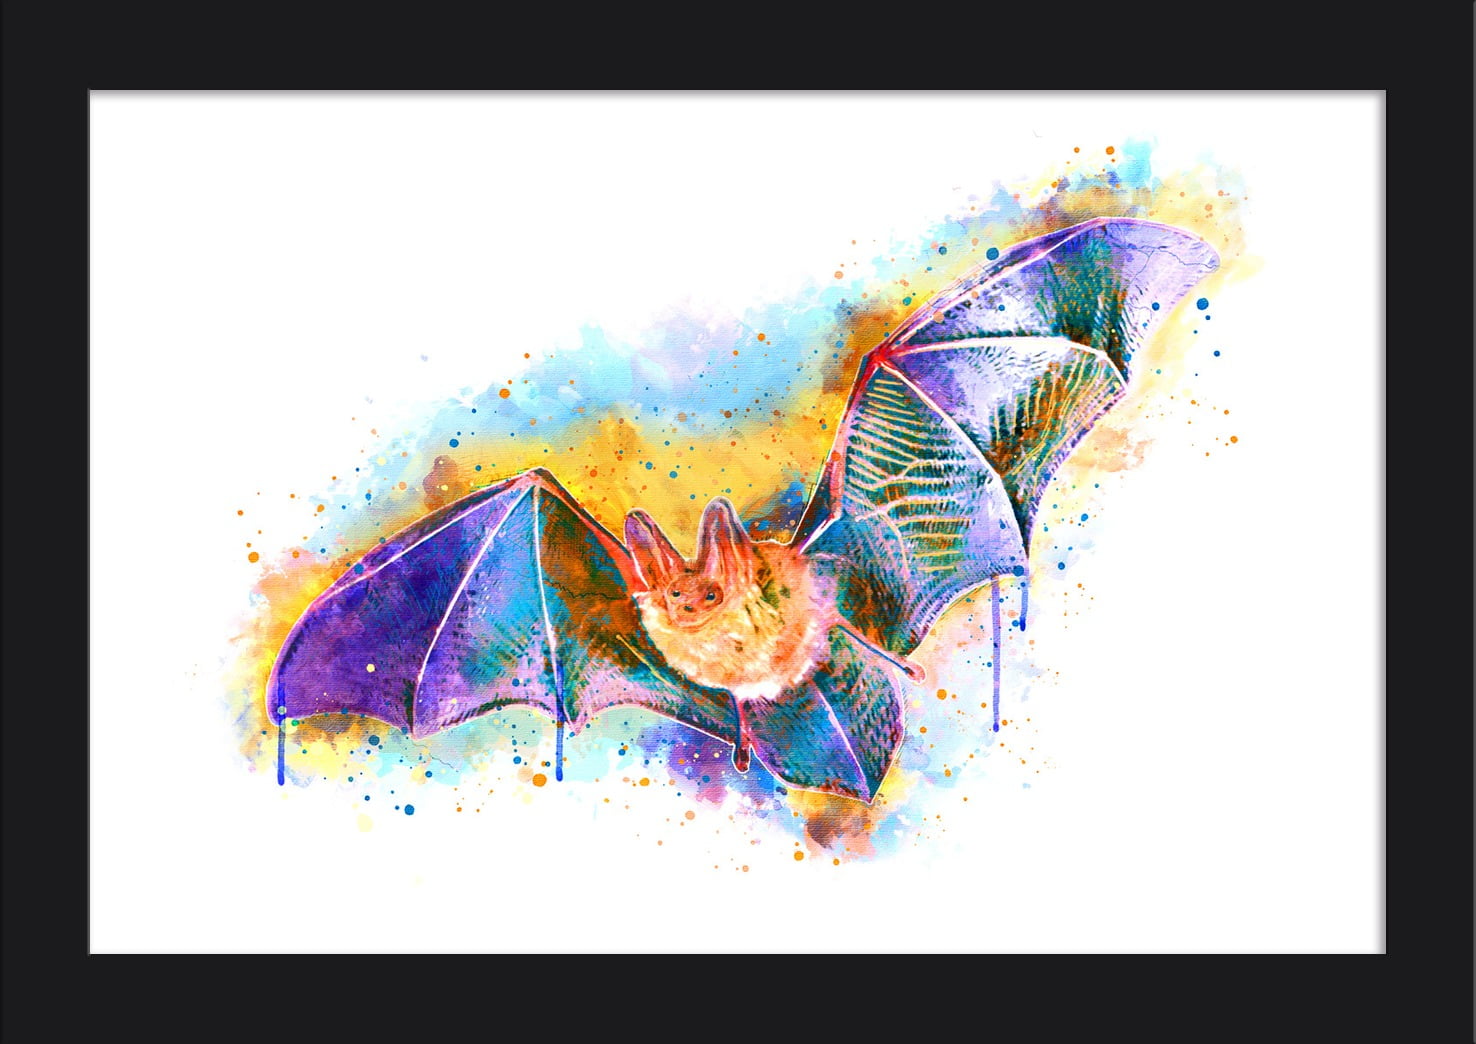 Bats and Black Cats III Giclee Stretched Canvas Artwork 16 x 20 Global Gallery Anne Tavoletti